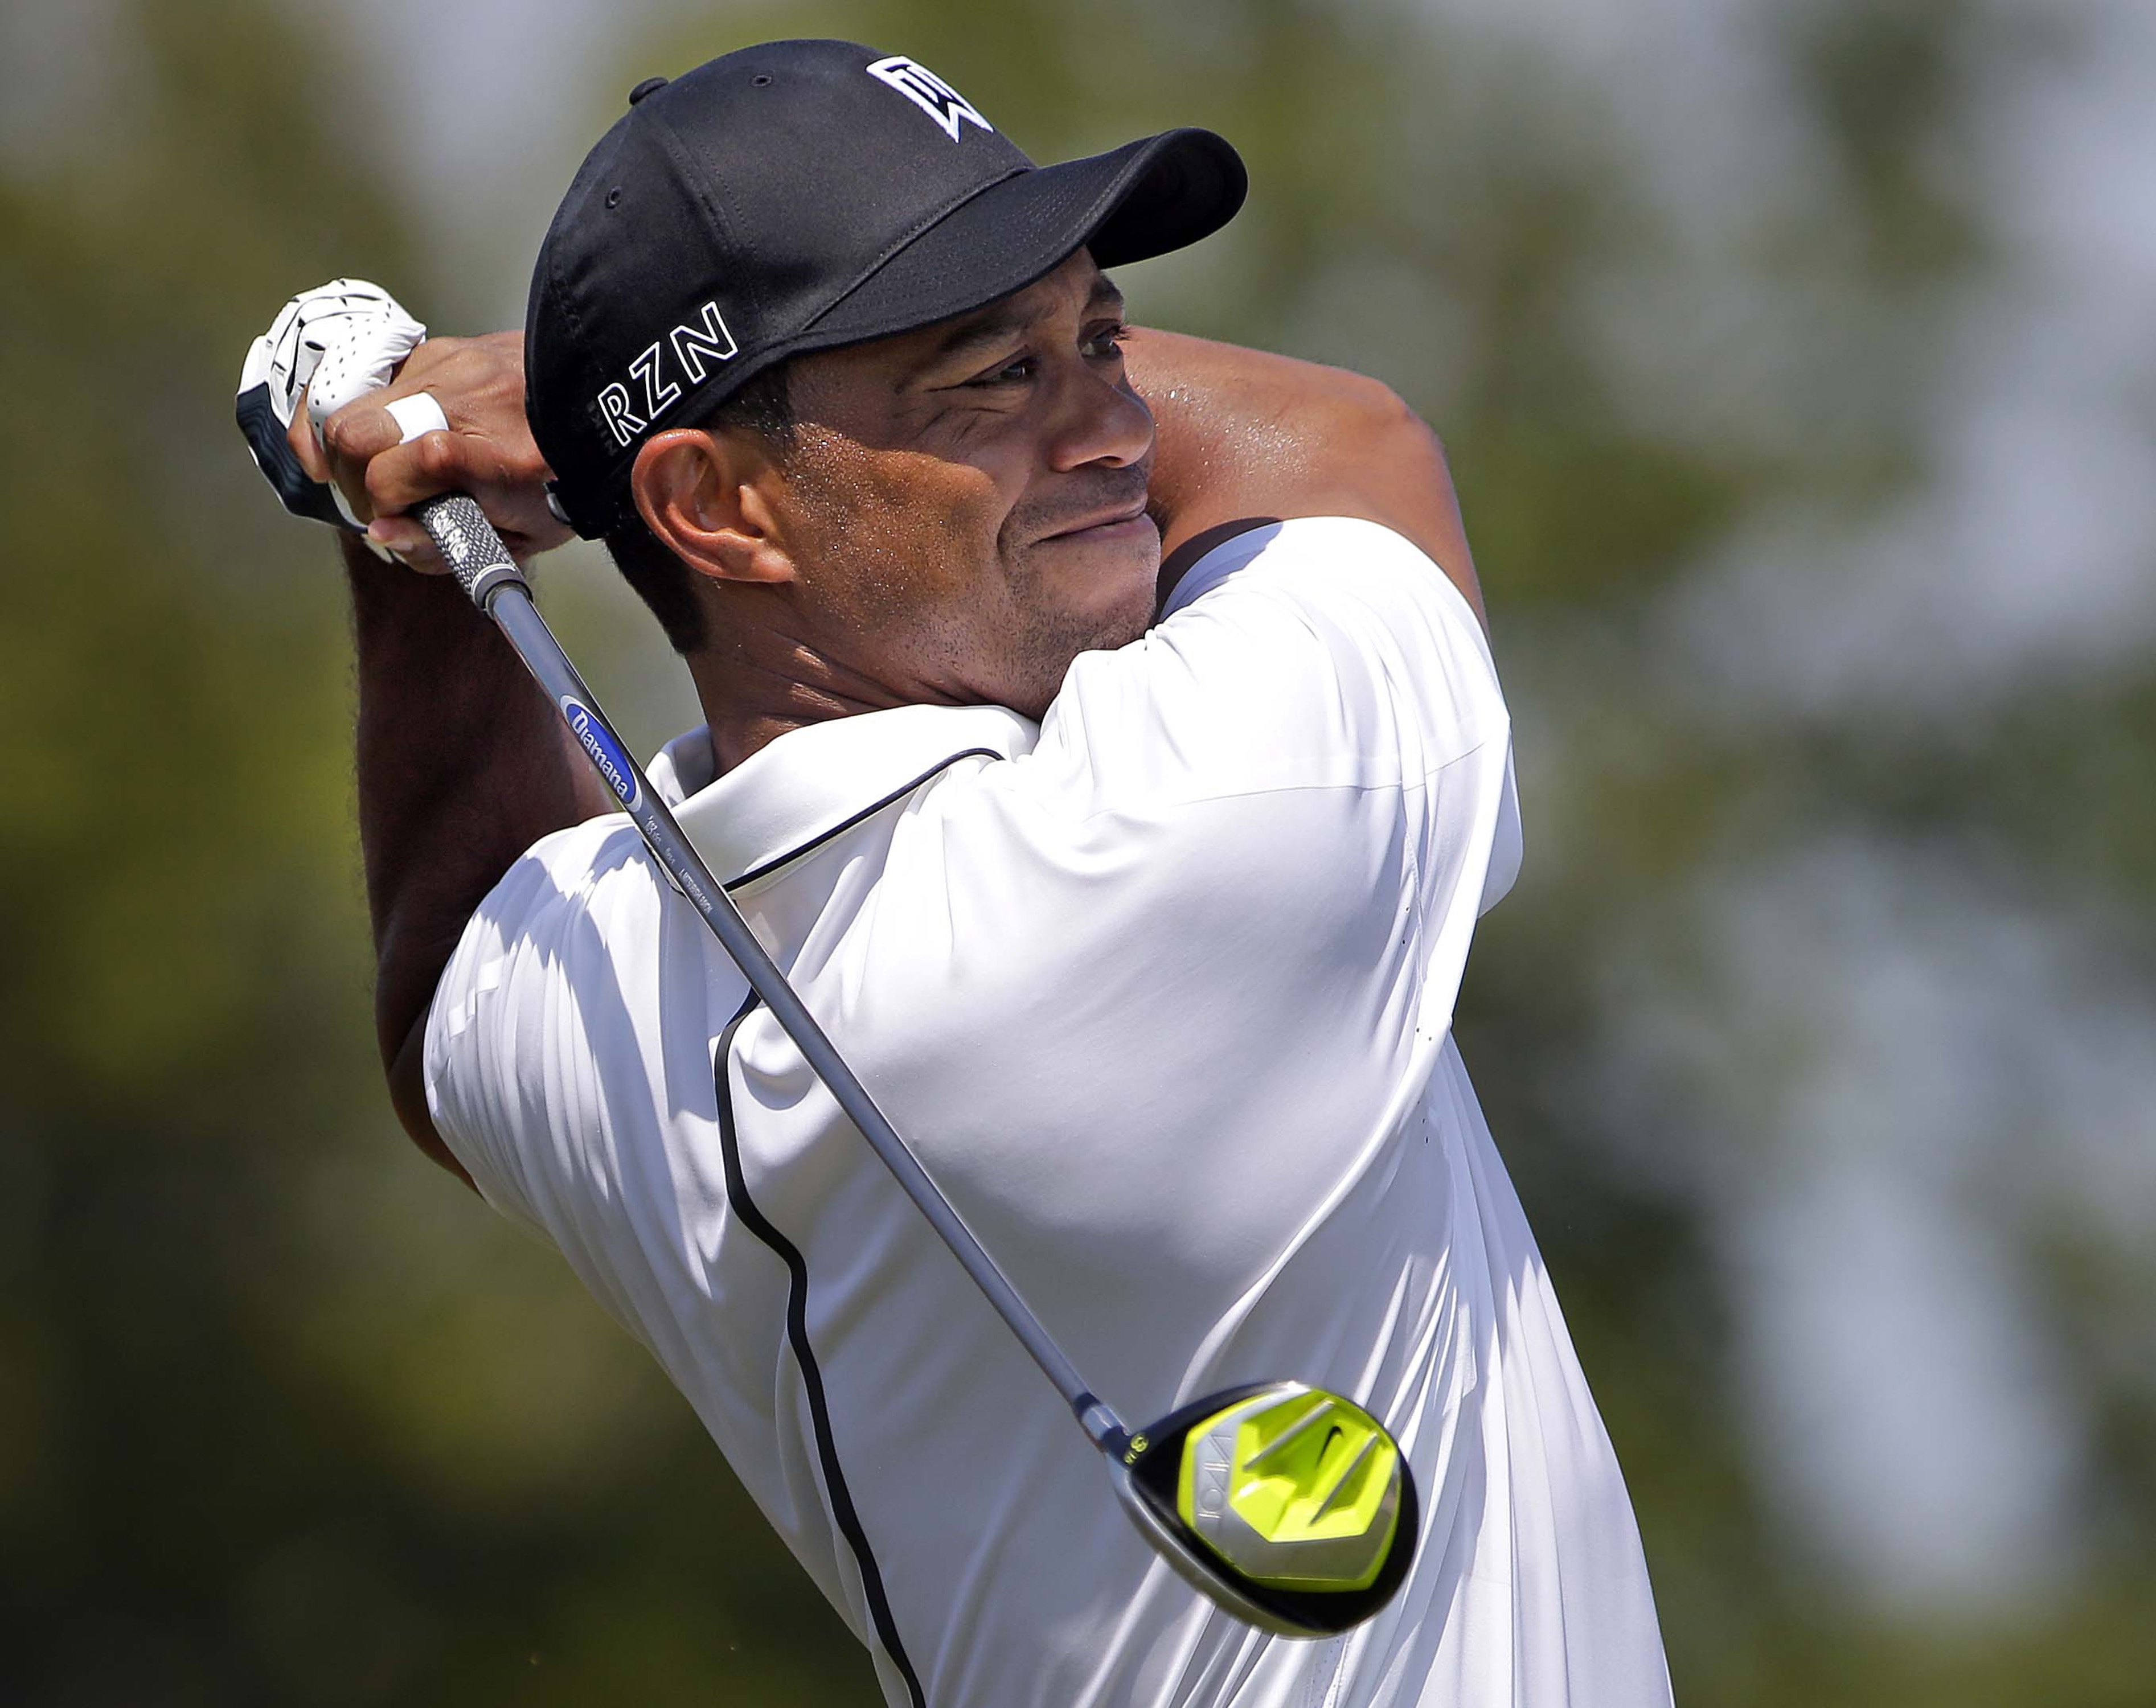 Tiger Woods will play at the Wyndham Championship, the last tournament of the regular season and an event he has never entered before. Photo: TNS